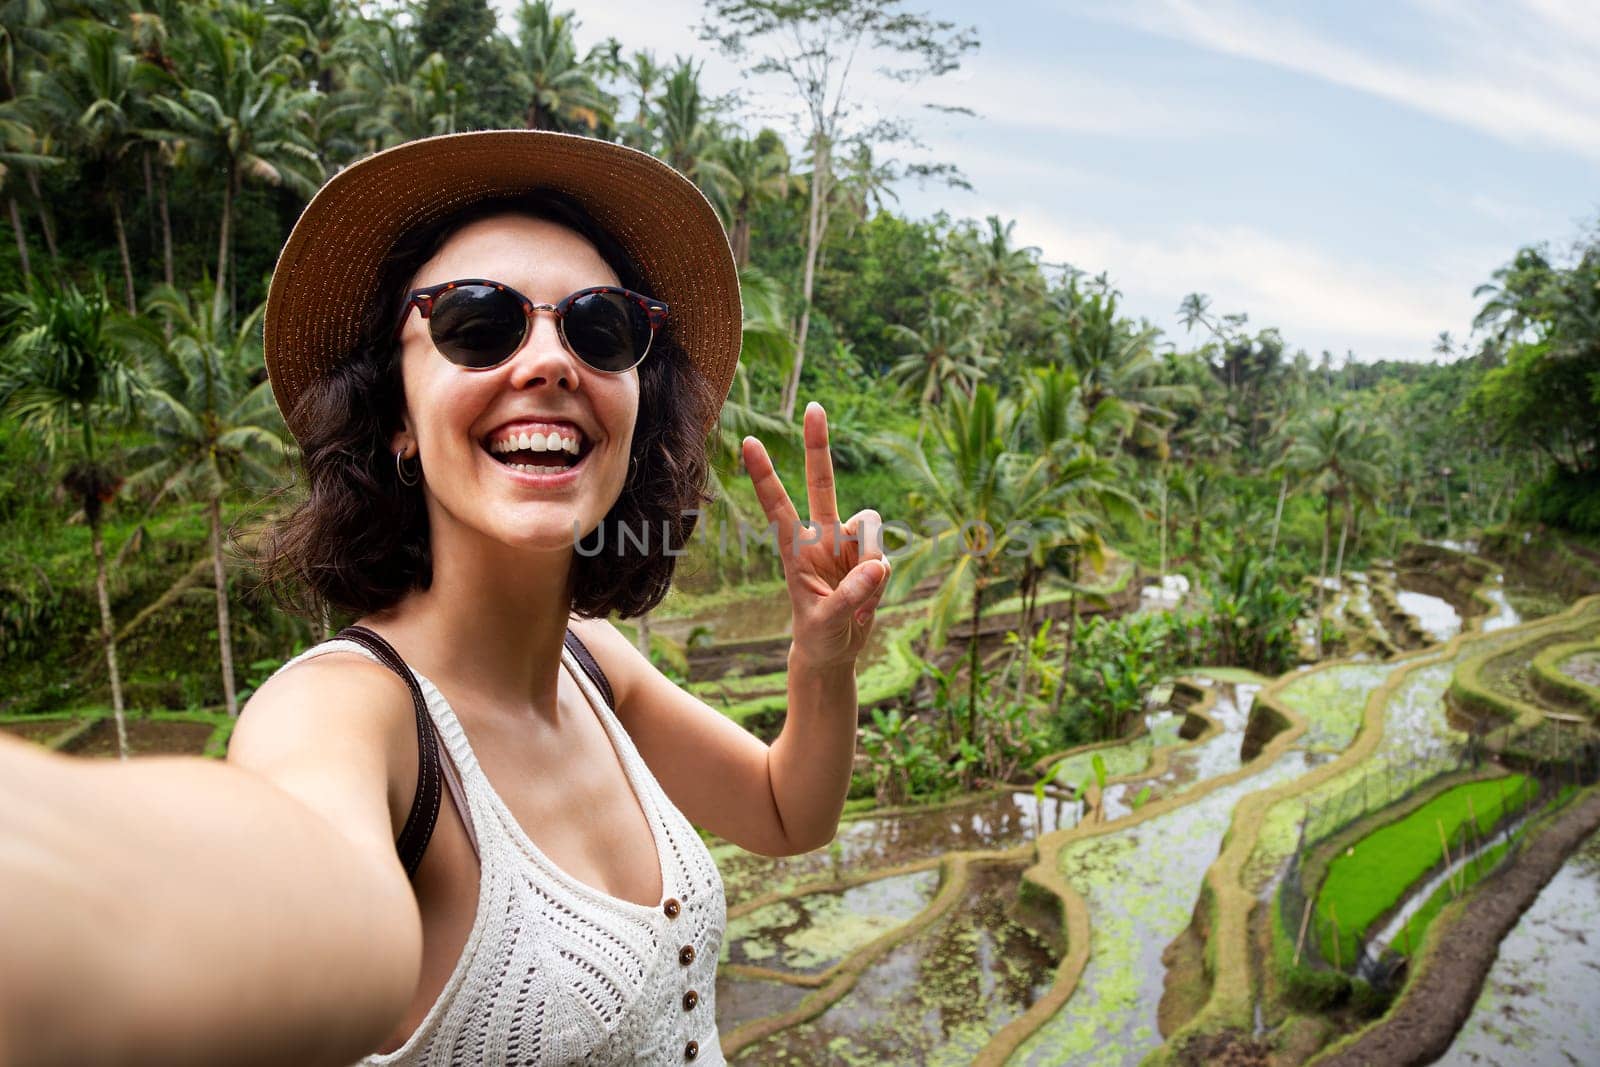 Young woman traveler wearing hat and sunglasses taking selfie in Tegalalng rice terrace, Bali. Copy space. by Hoverstock